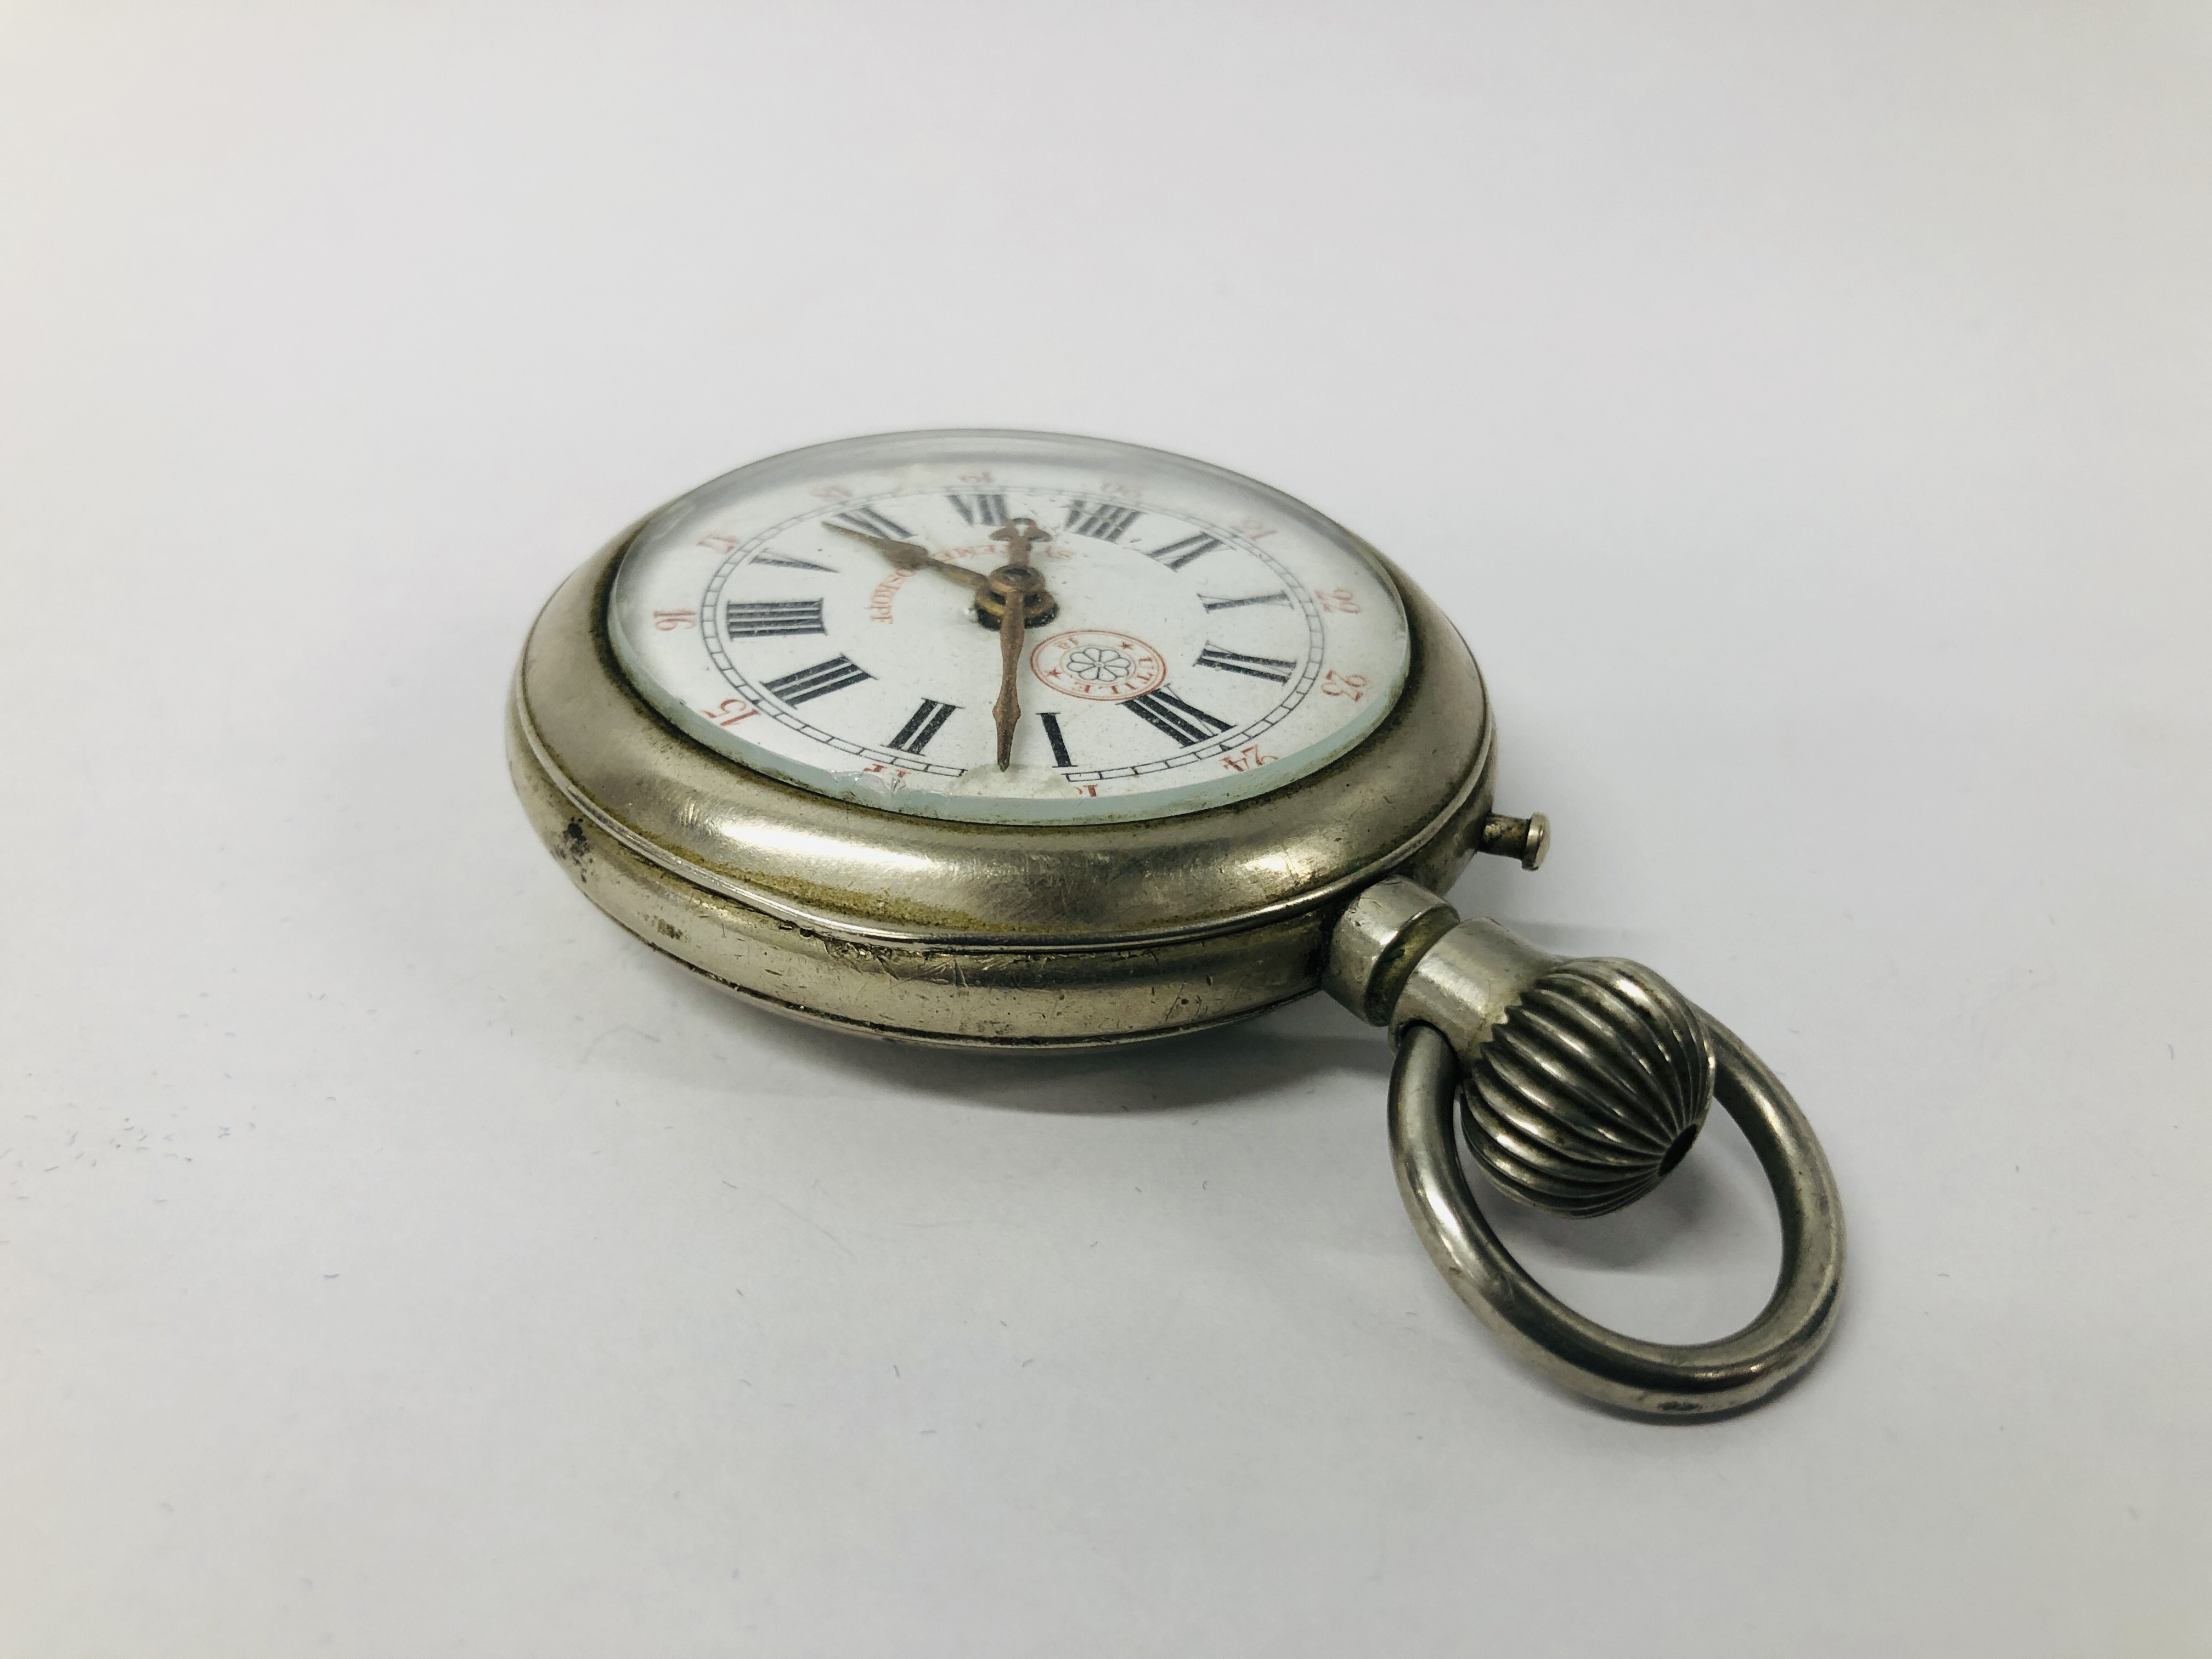 "ROSSKOPF" SYSTEME SWISS MADE POCKET WATCH, ENAMELLED DIAL A/F D 6CM. - Image 3 of 7